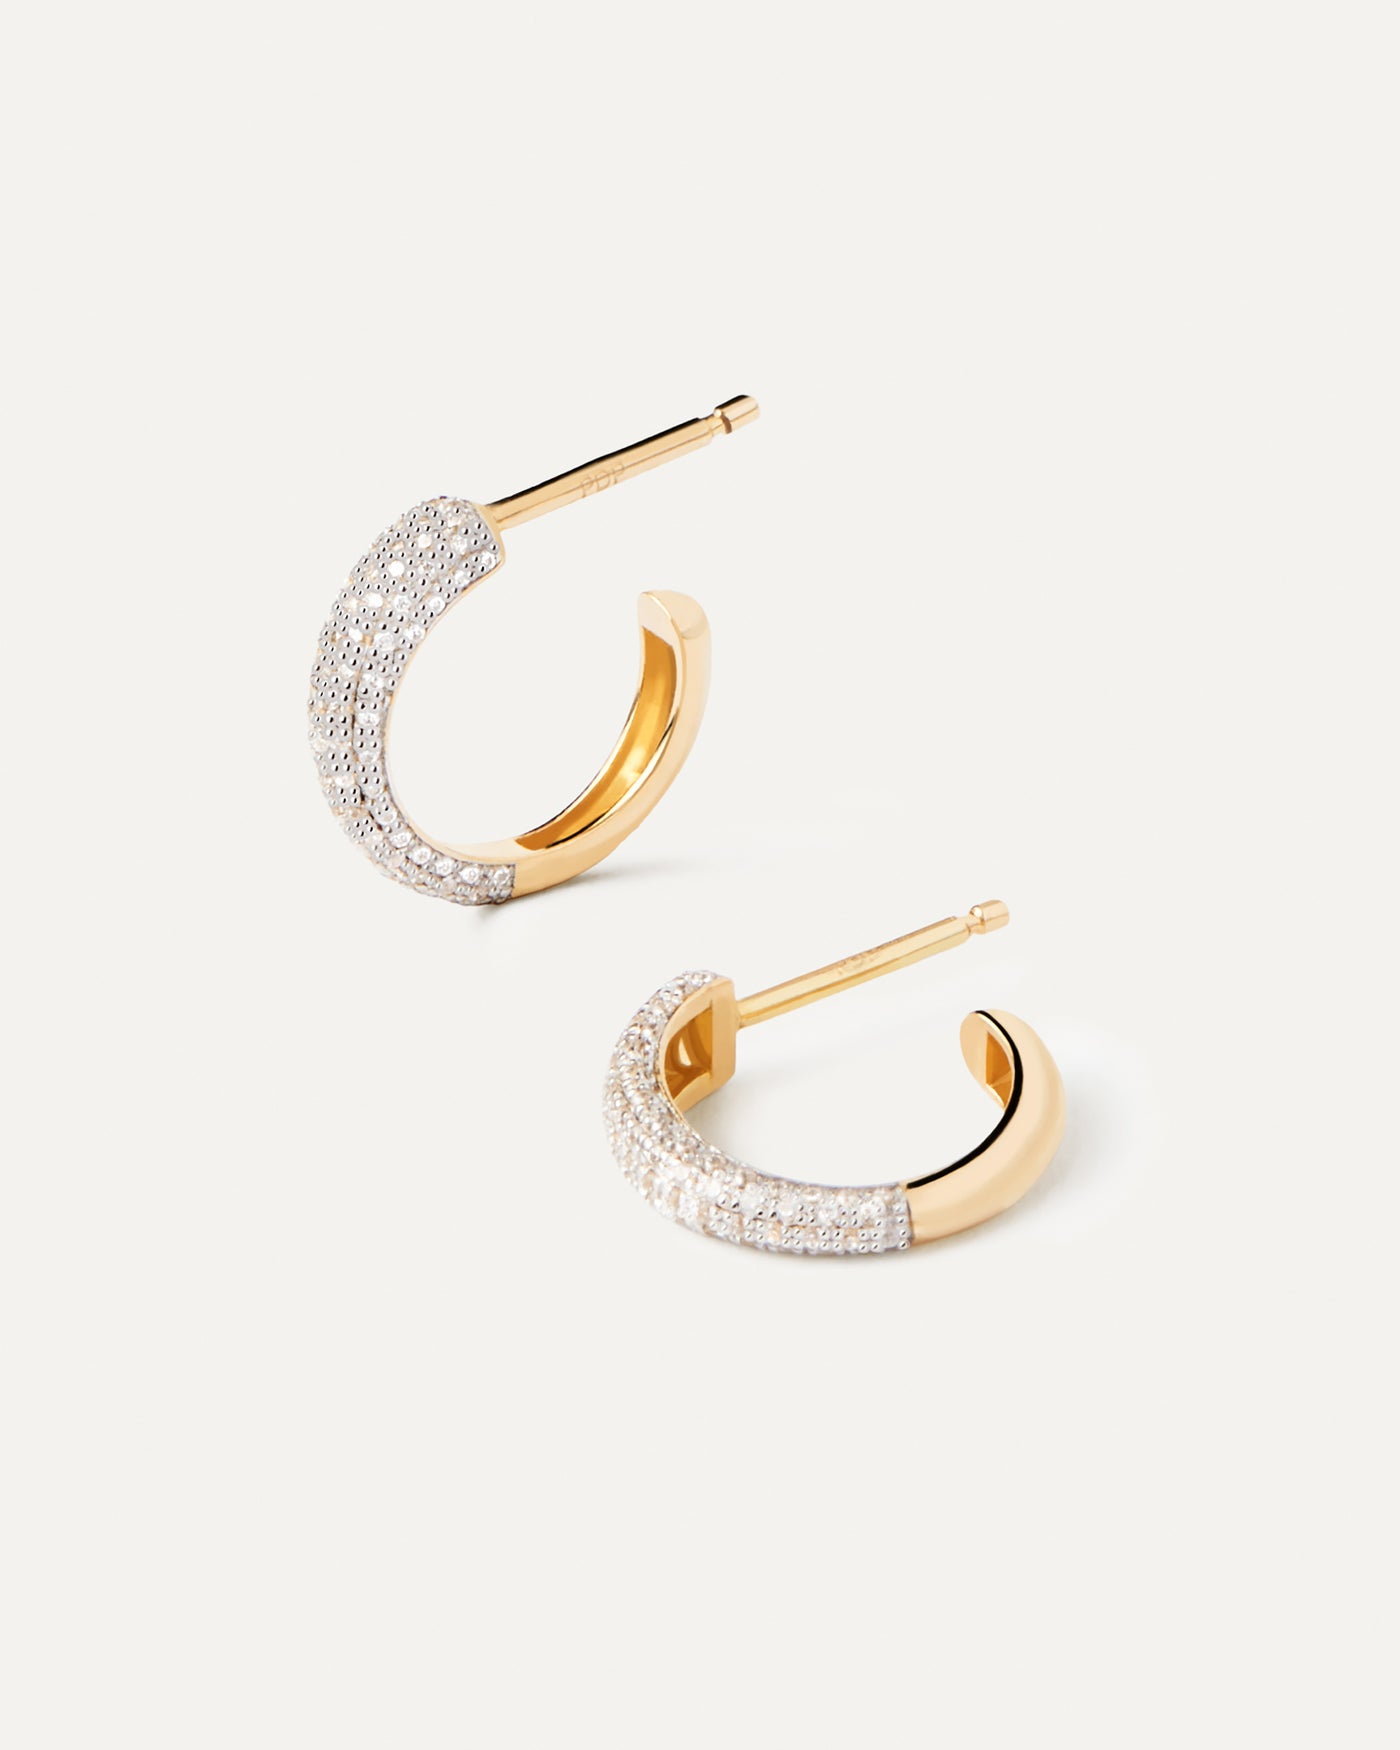 2023 Selection | Diamonds and Gold Soho Mini Hoops. Small hoop earrings in solid yellow gold with 81 pavé diamonds of 0.23 carats. Get the latest arrival from PDPAOLA. Place your order safely and get this Best Seller. Free Shipping.